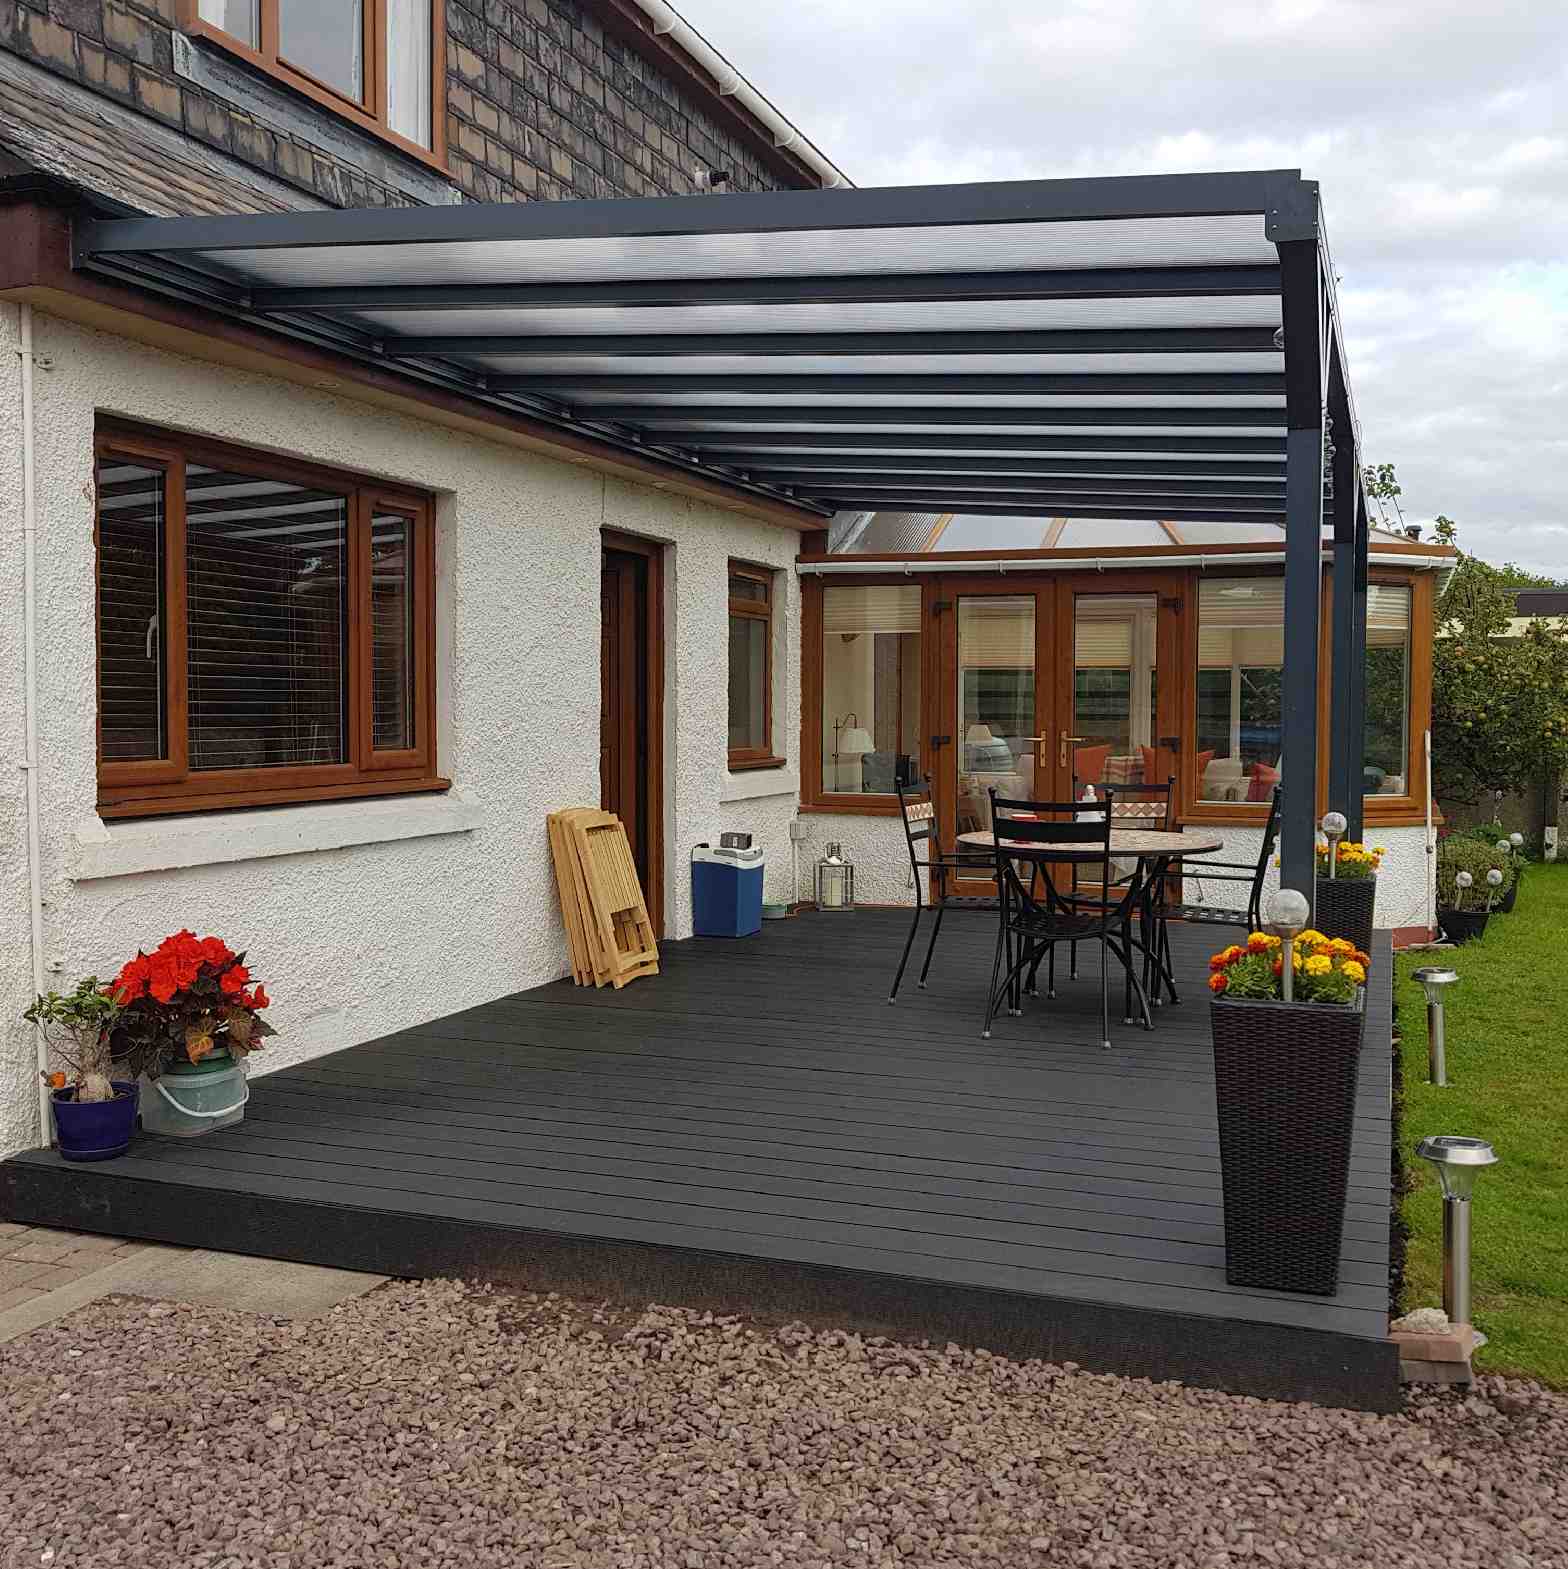 Buy Omega Verandah, Anthracite Grey, 16mm Polycarbonate Glazing - 4.2m (W) x 1.5m (P), (3) Supporting Posts online today